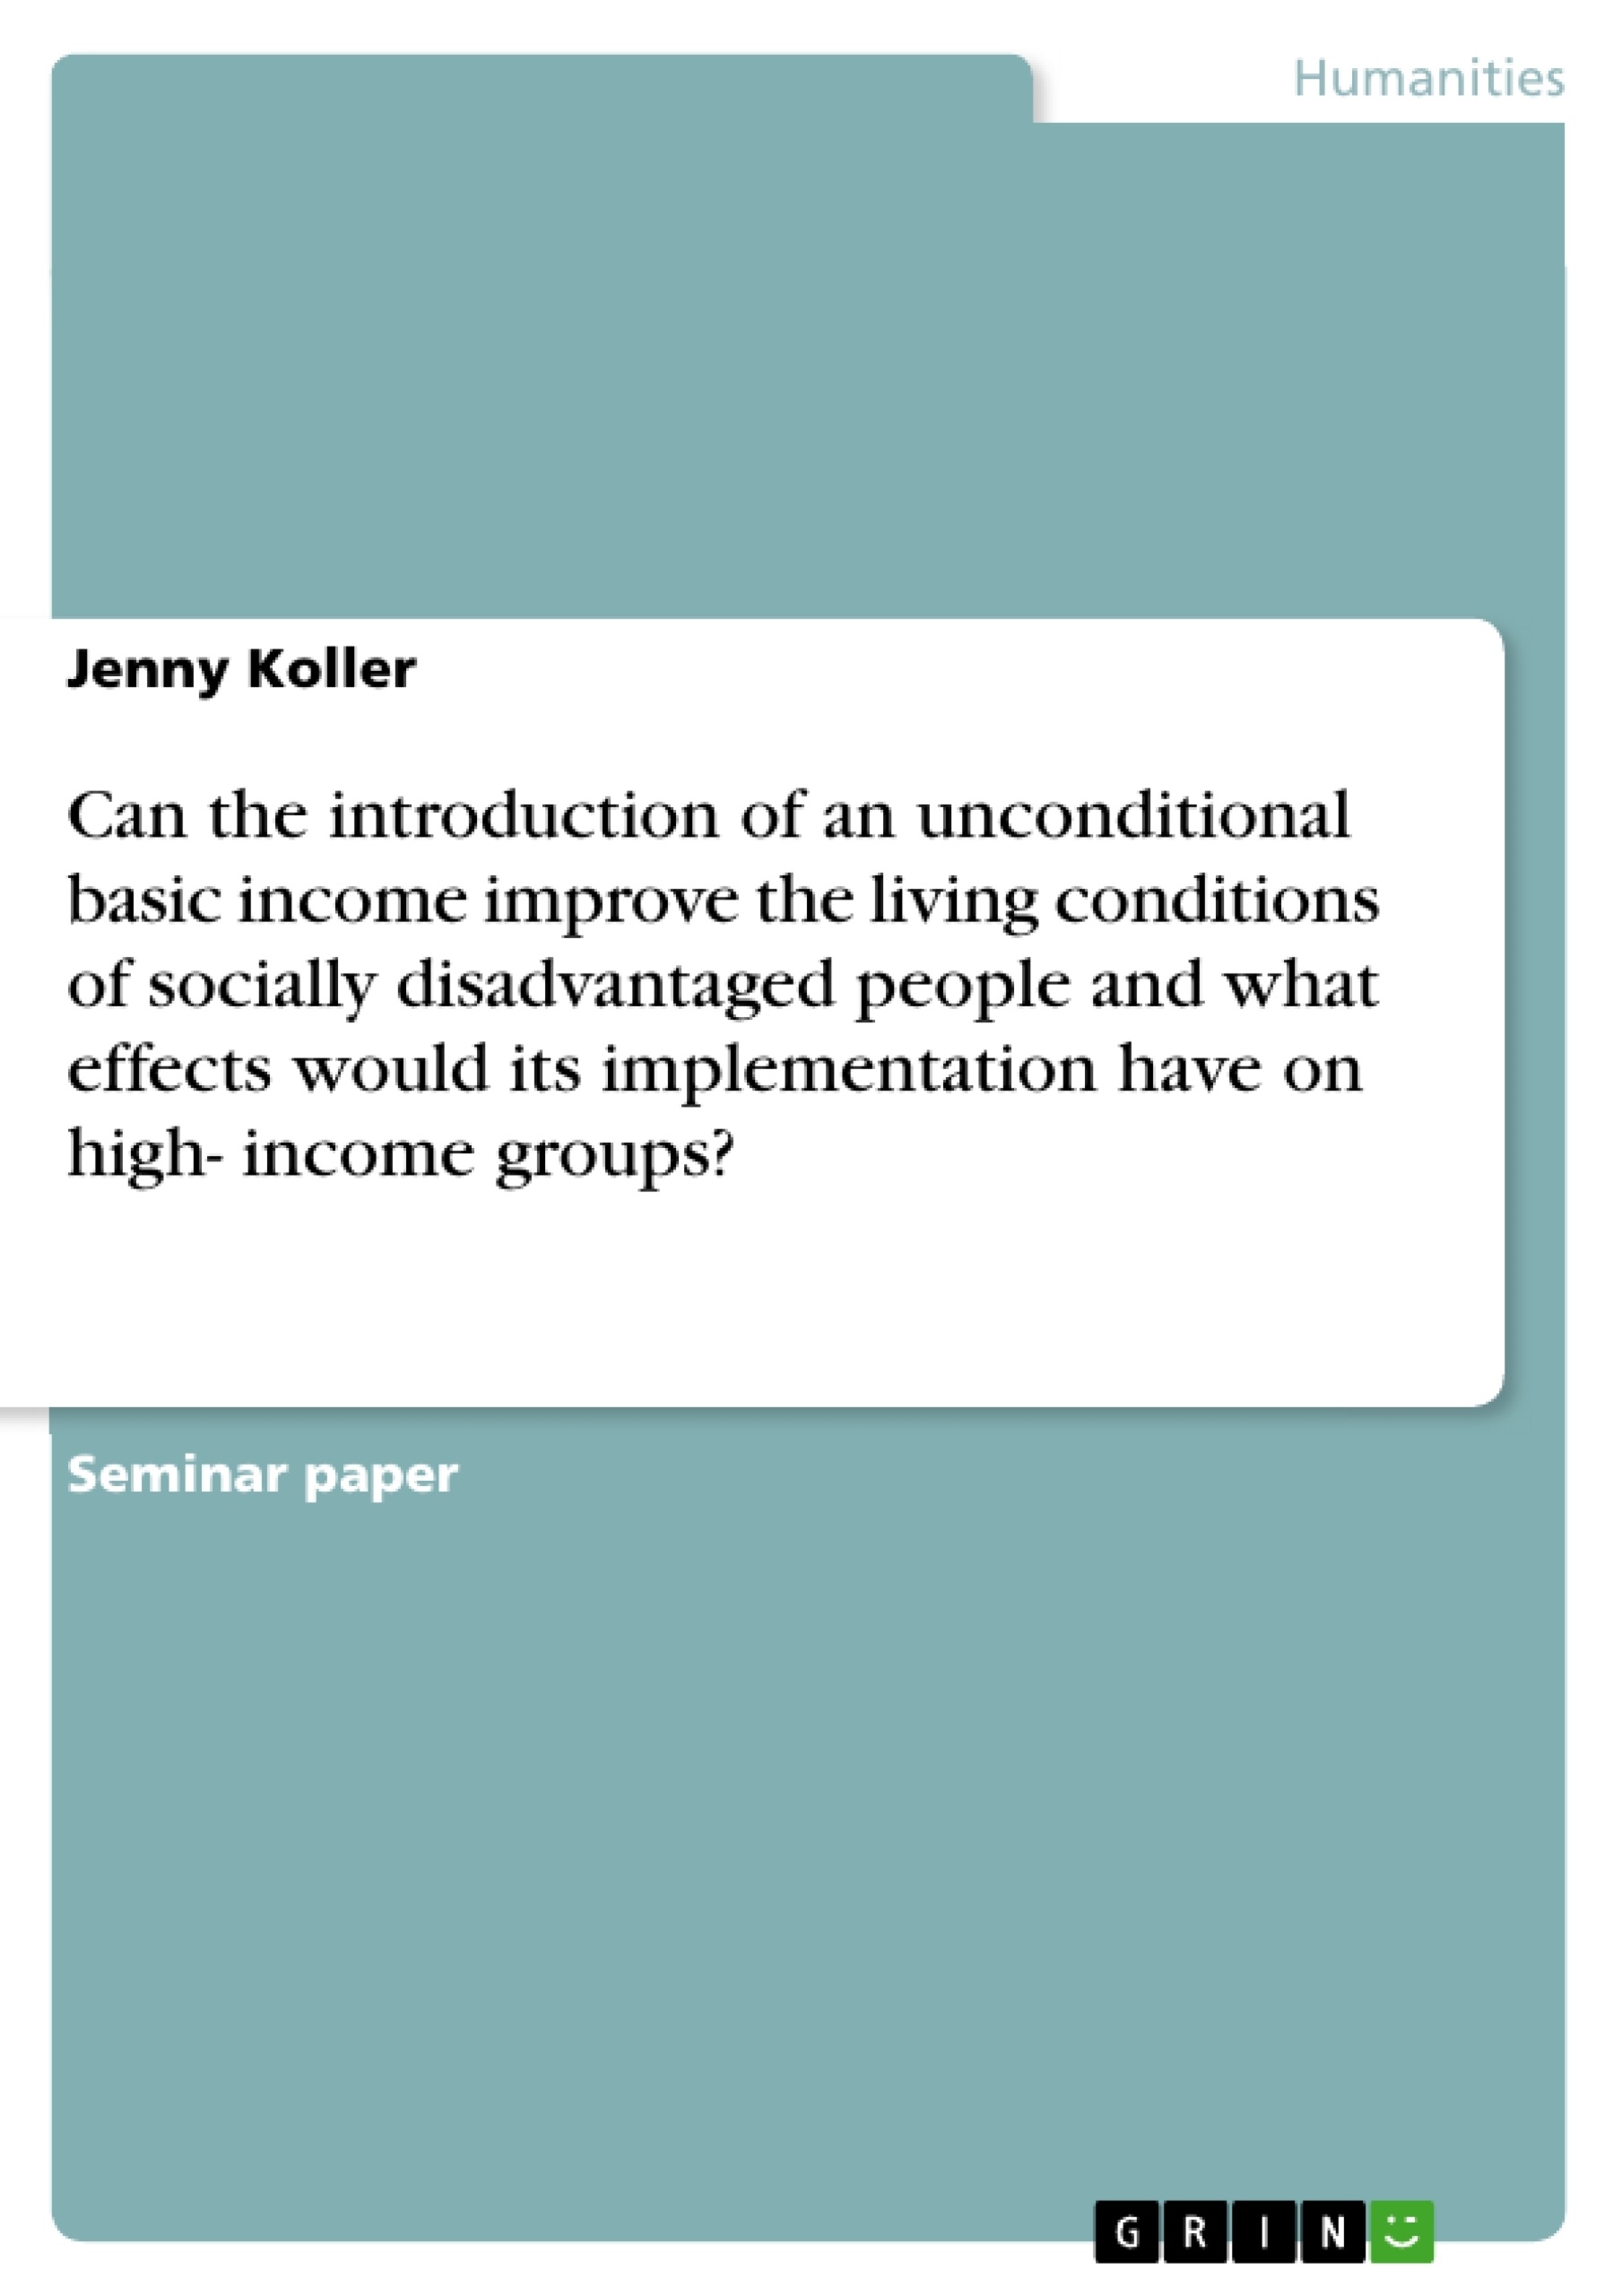 Título: Can the introduction of an unconditional basic income improve the living conditions of socially disadvantaged people and what effects would its implementation have on high- income groups?